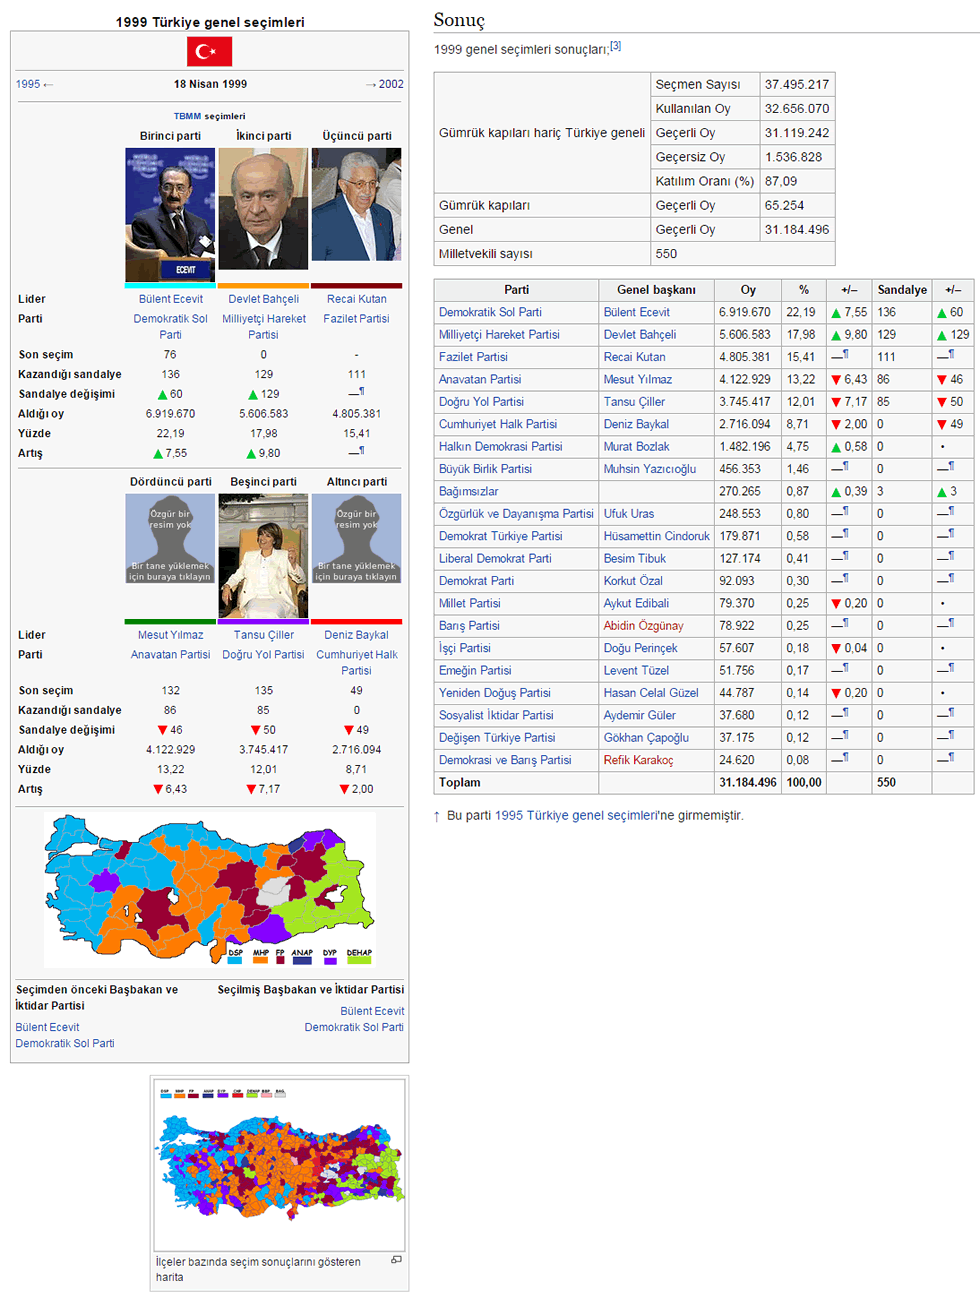 1999 Turkey General Elections